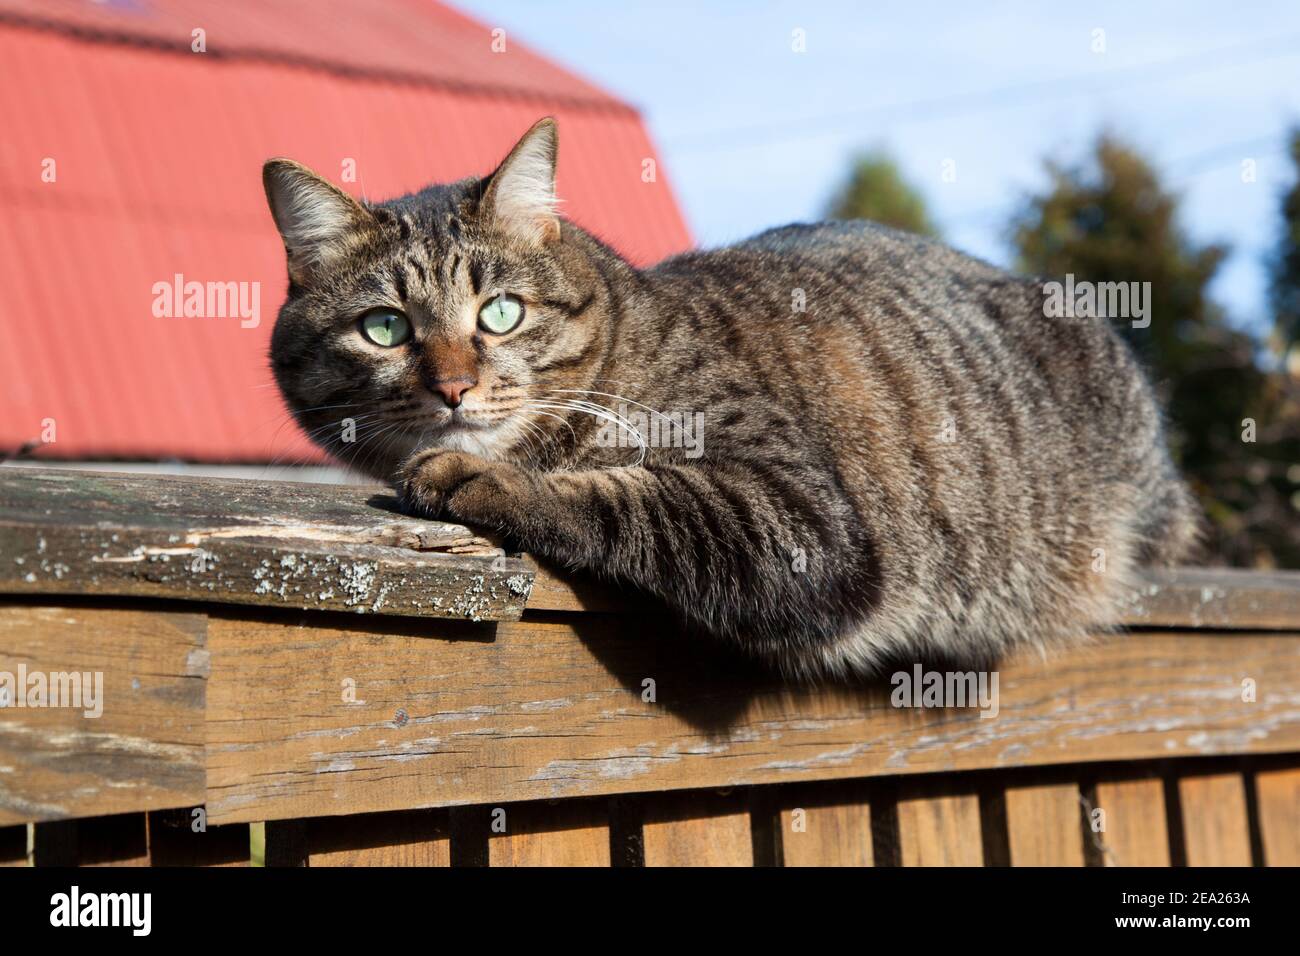 Cat on an old wooden fence against the background of country houses Stock Photo